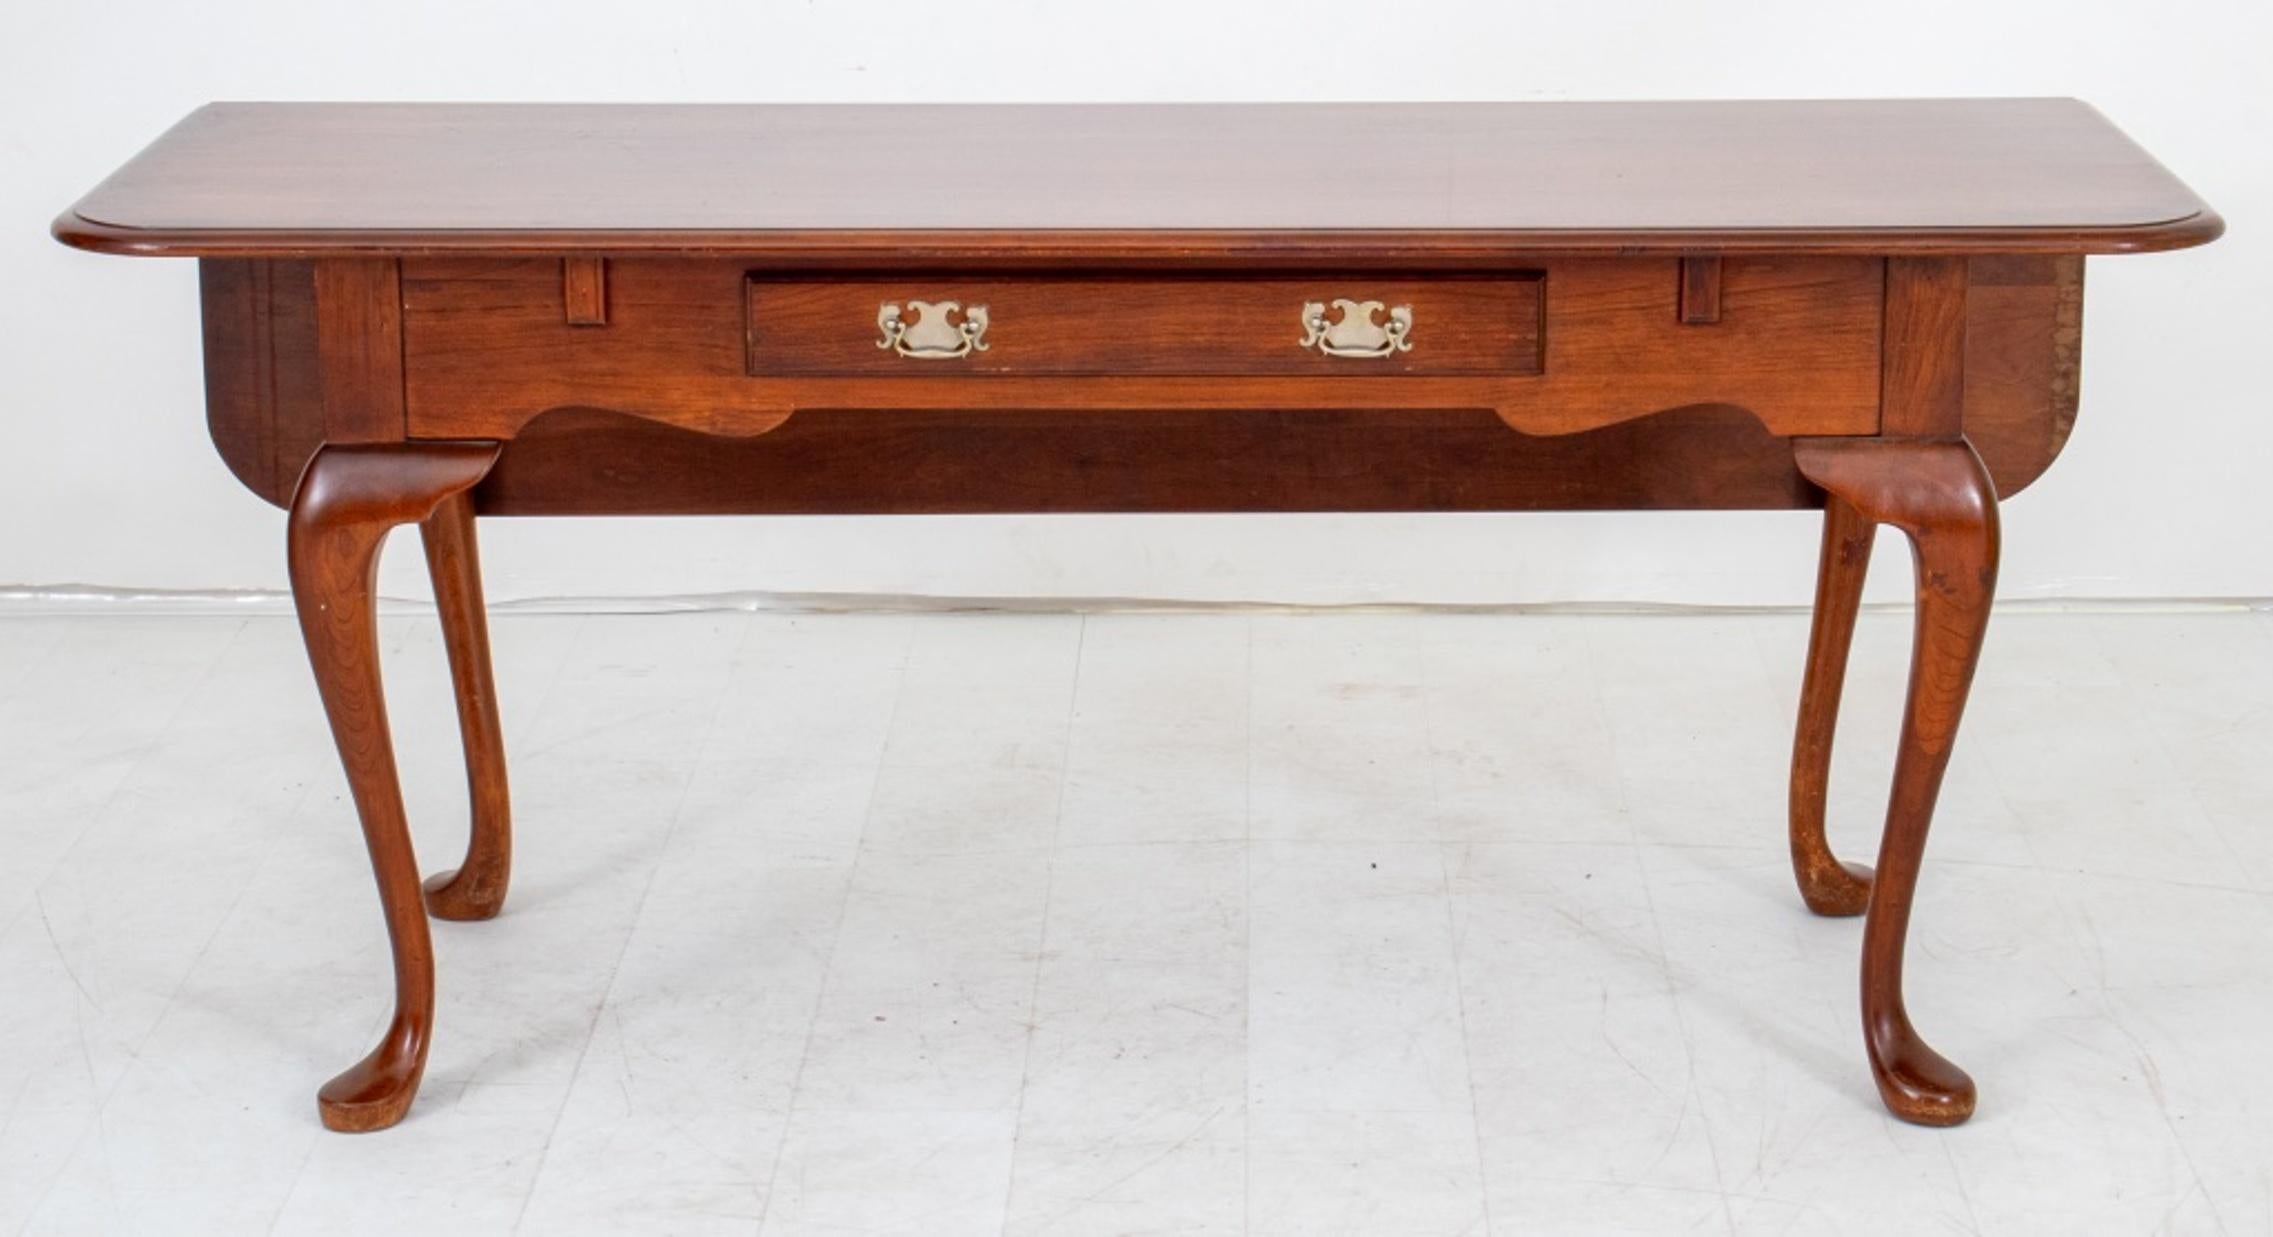 Queen Anne style metamorphic dining table or desk with single drawer, marked to interior 